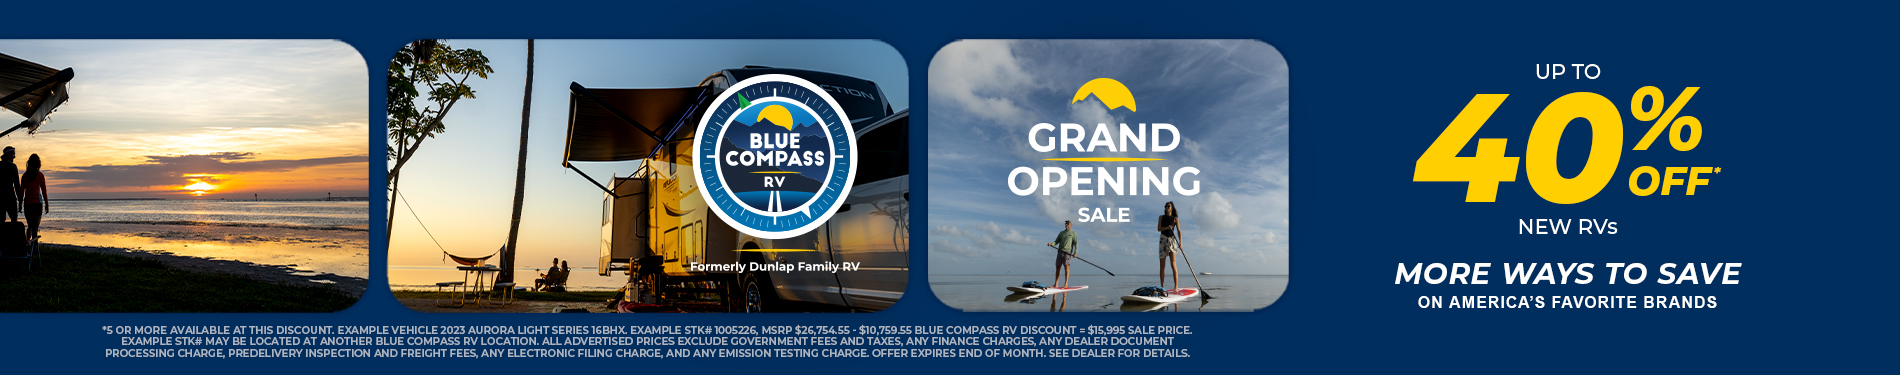 Blue Compass Grand Opening 40%